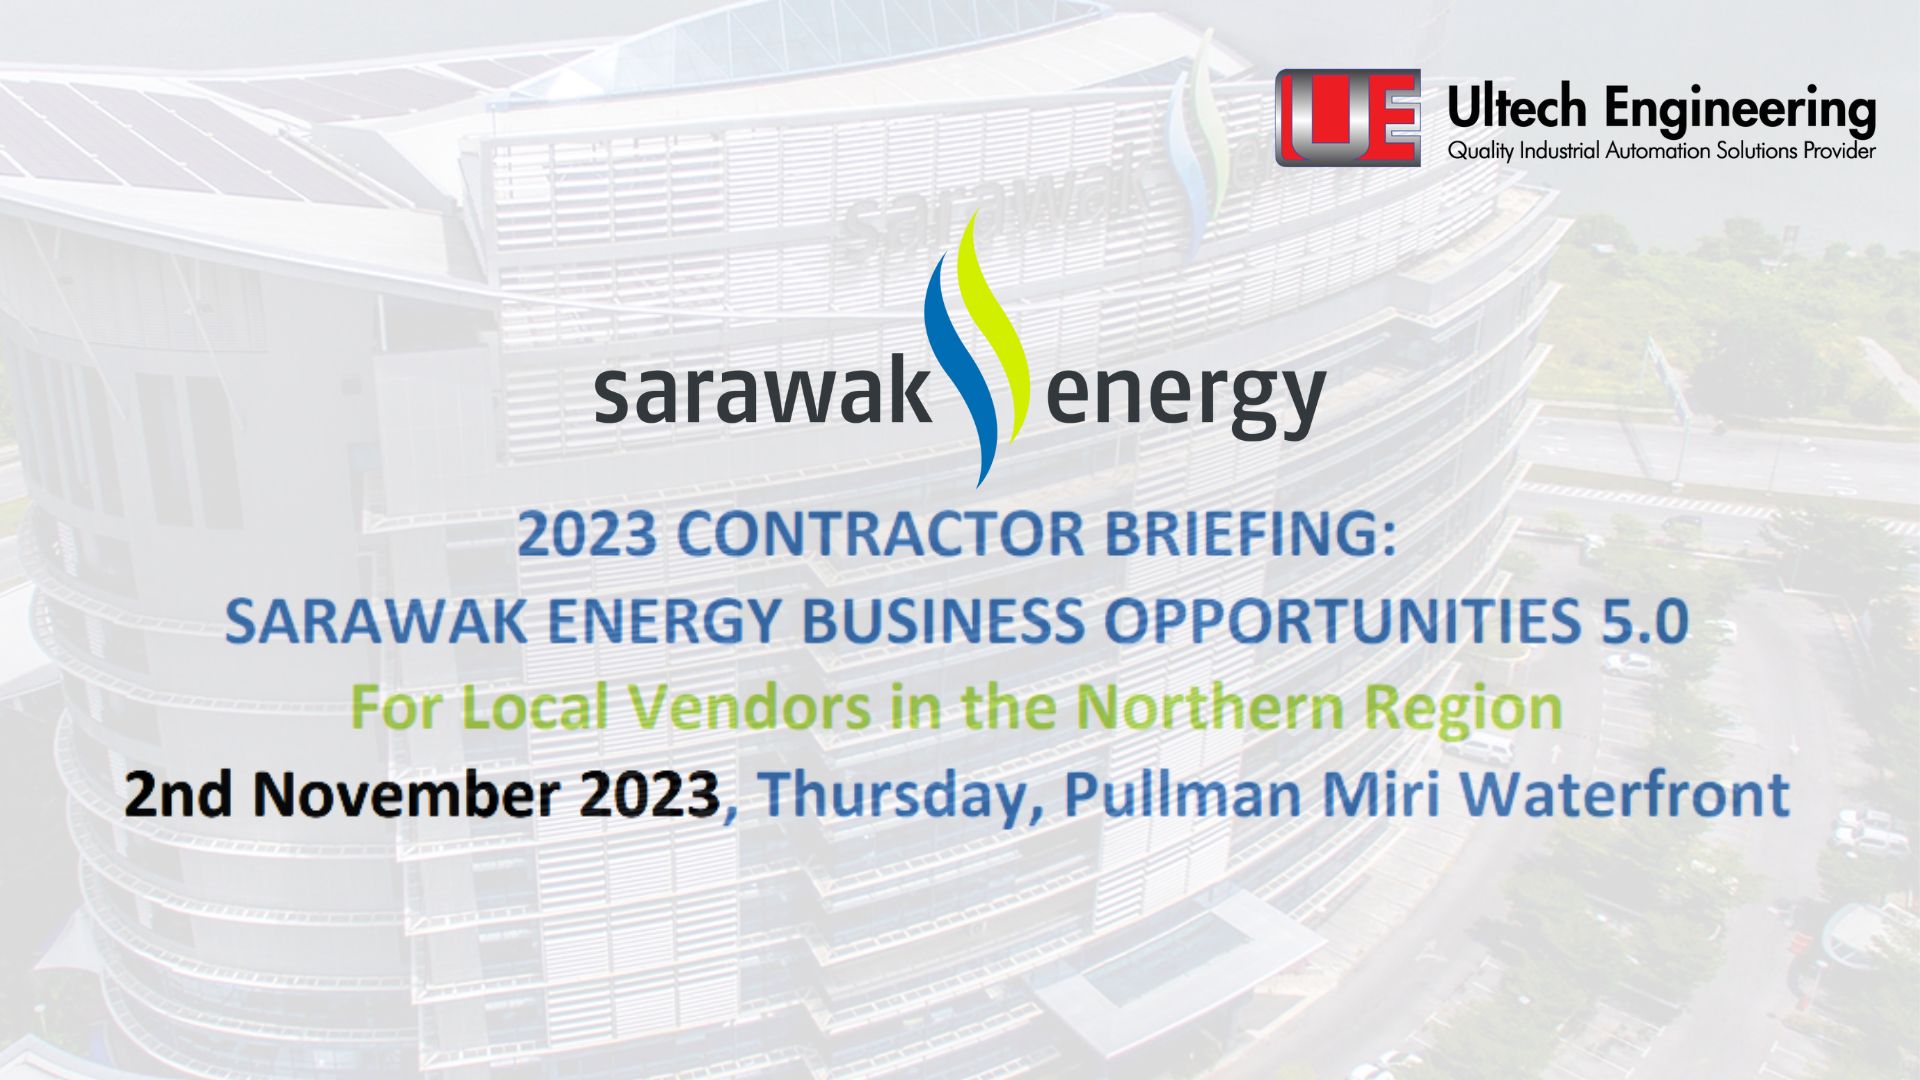 2023 contractors briefing: sarawak energy business opportunity 5.0